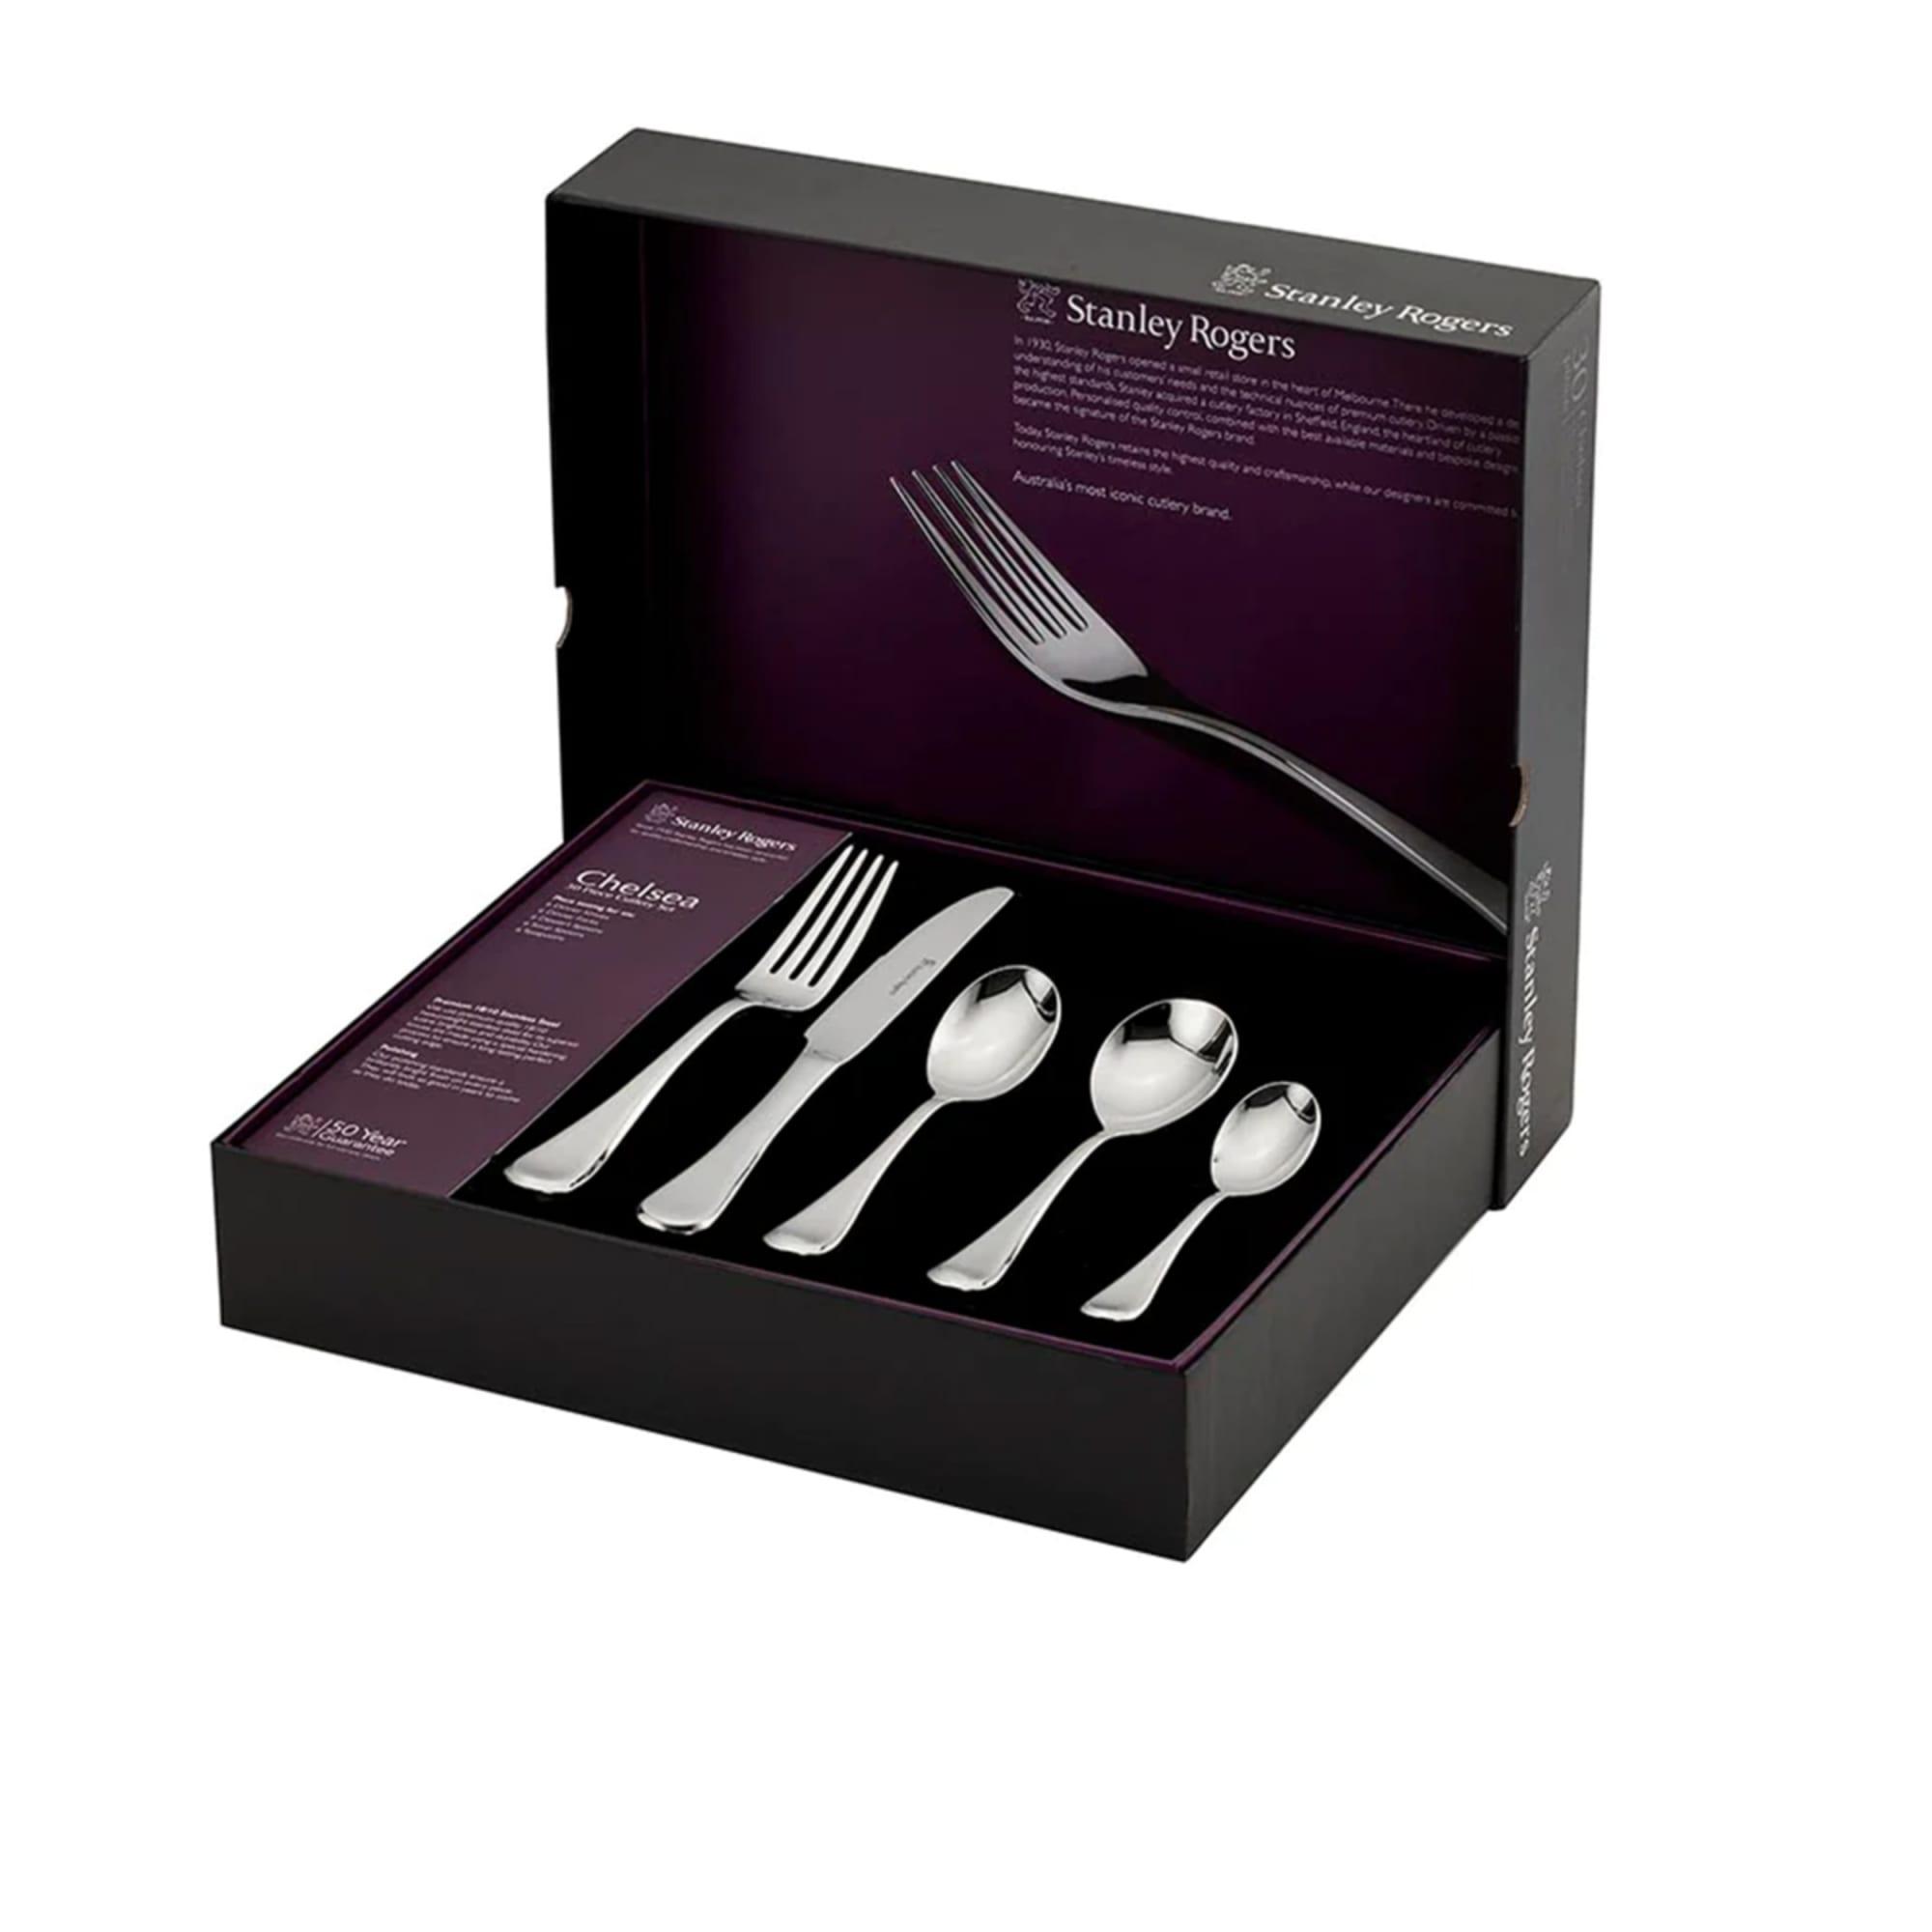 Stanley Rogers Chelsea Cutlery Set 30pc Silver Image 5